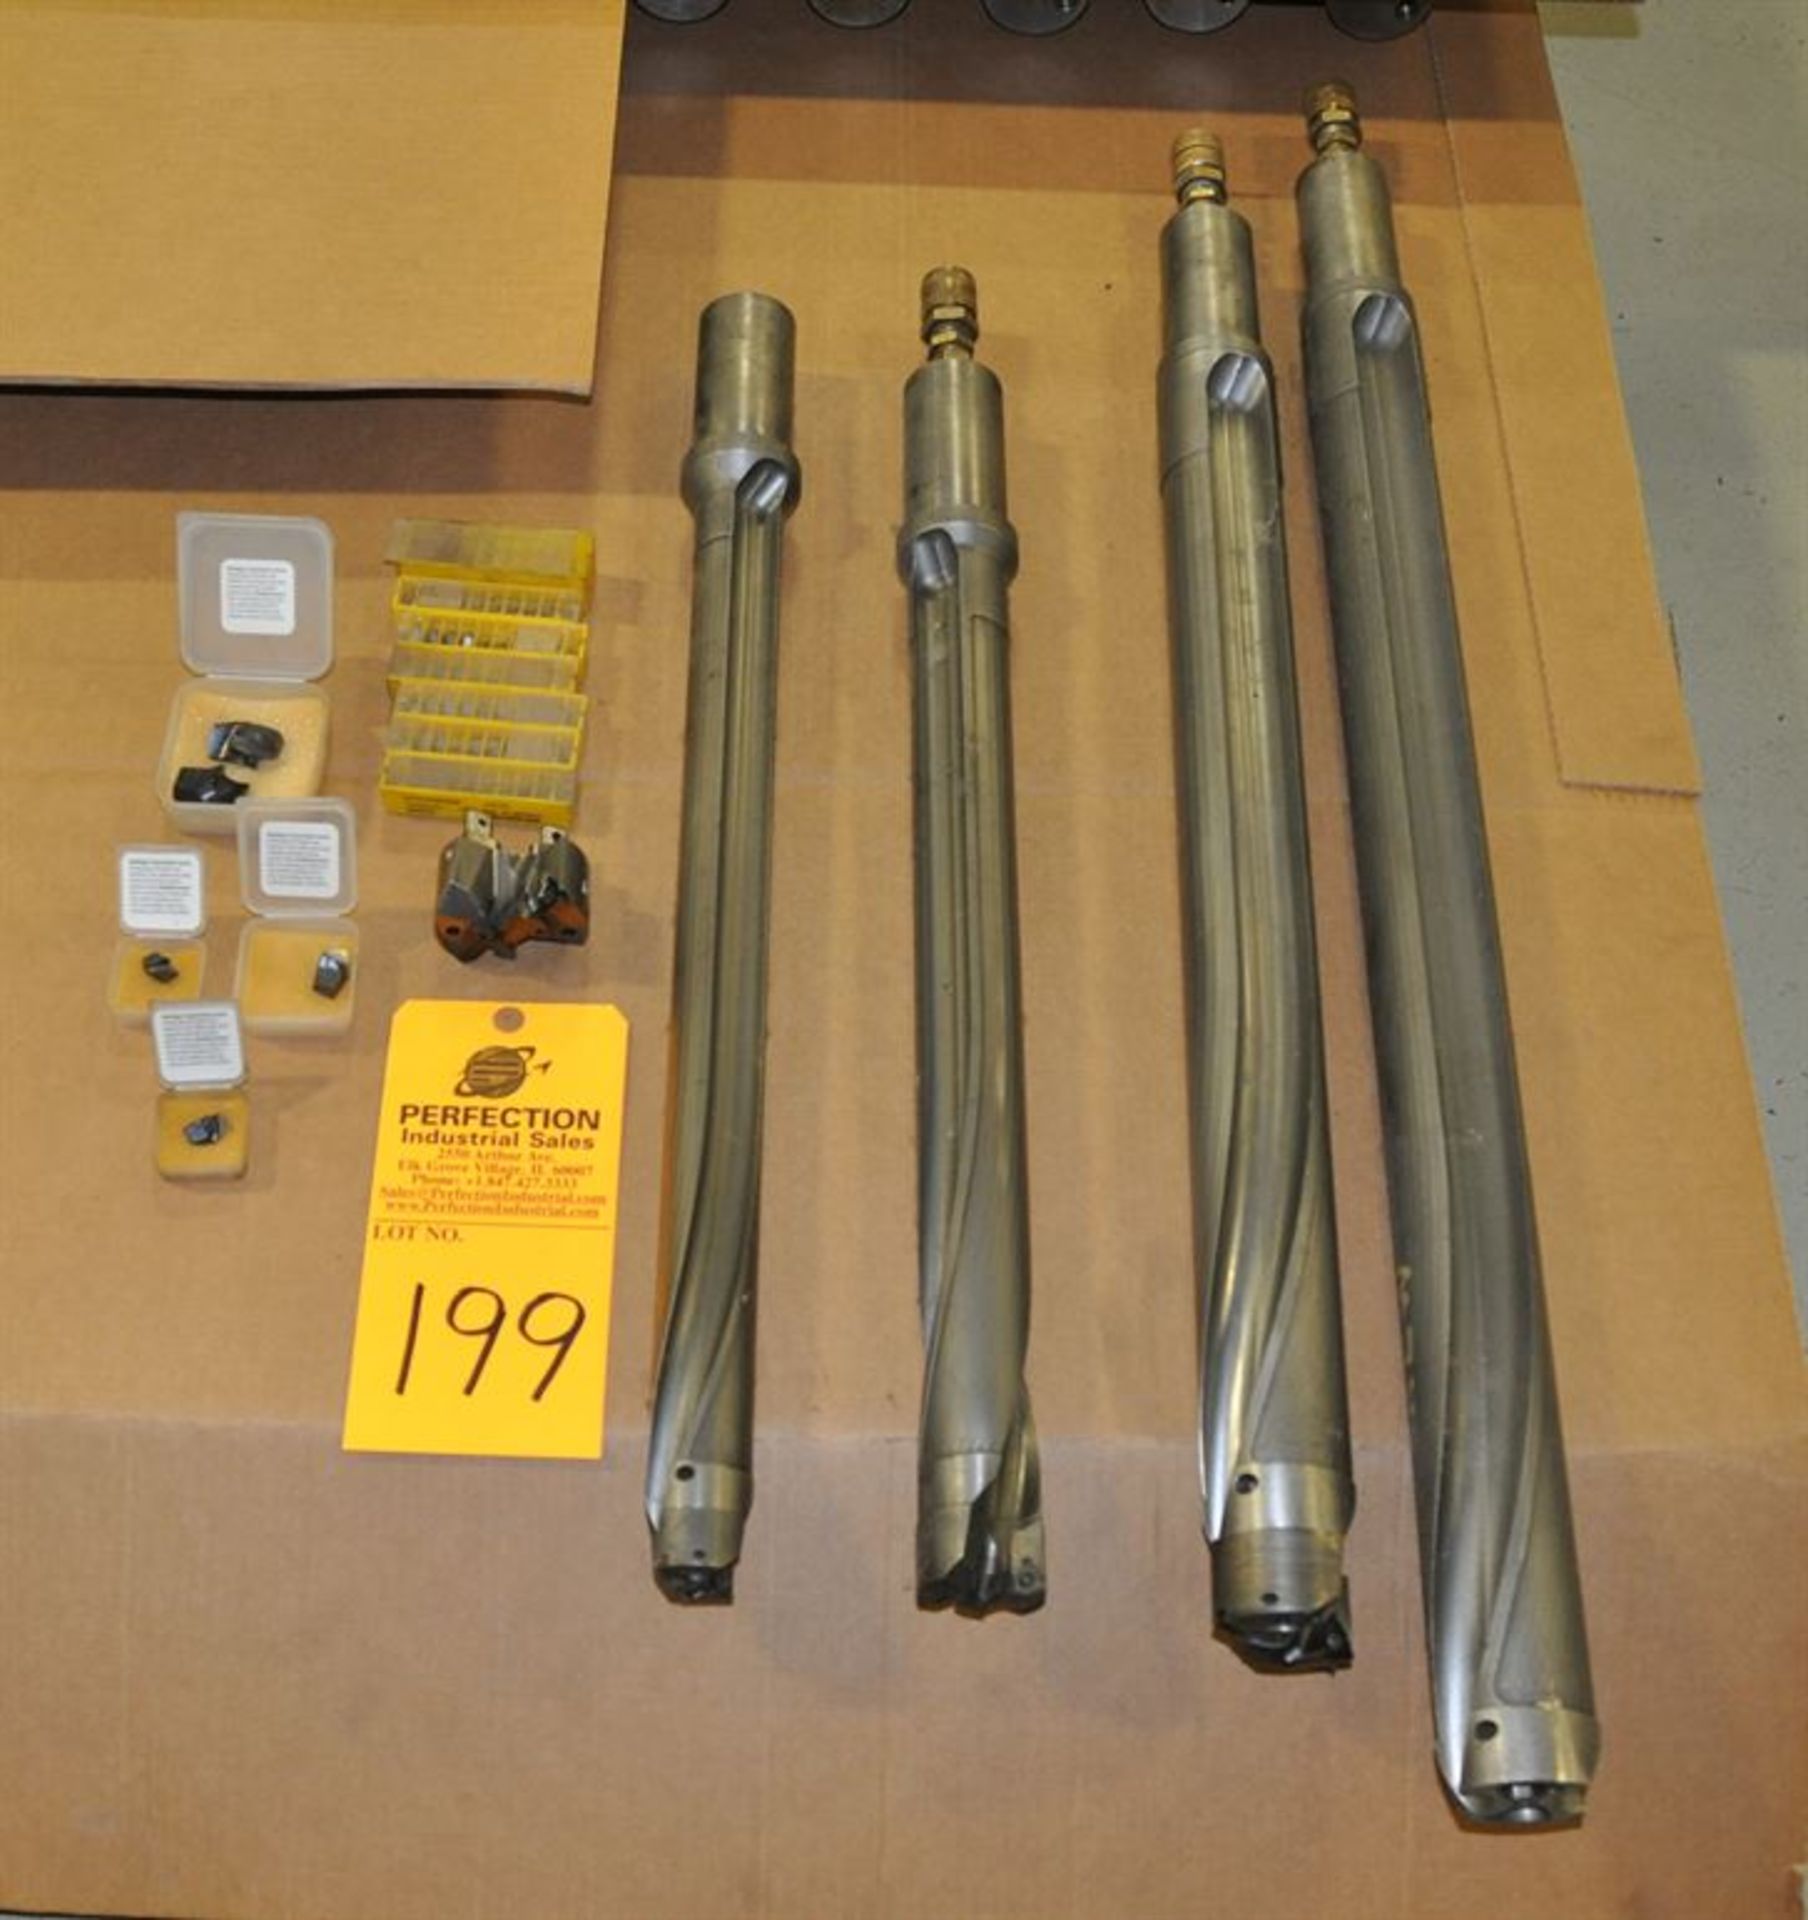 (4) Kennametal Through Coolant Modular Drills, heads and inserts